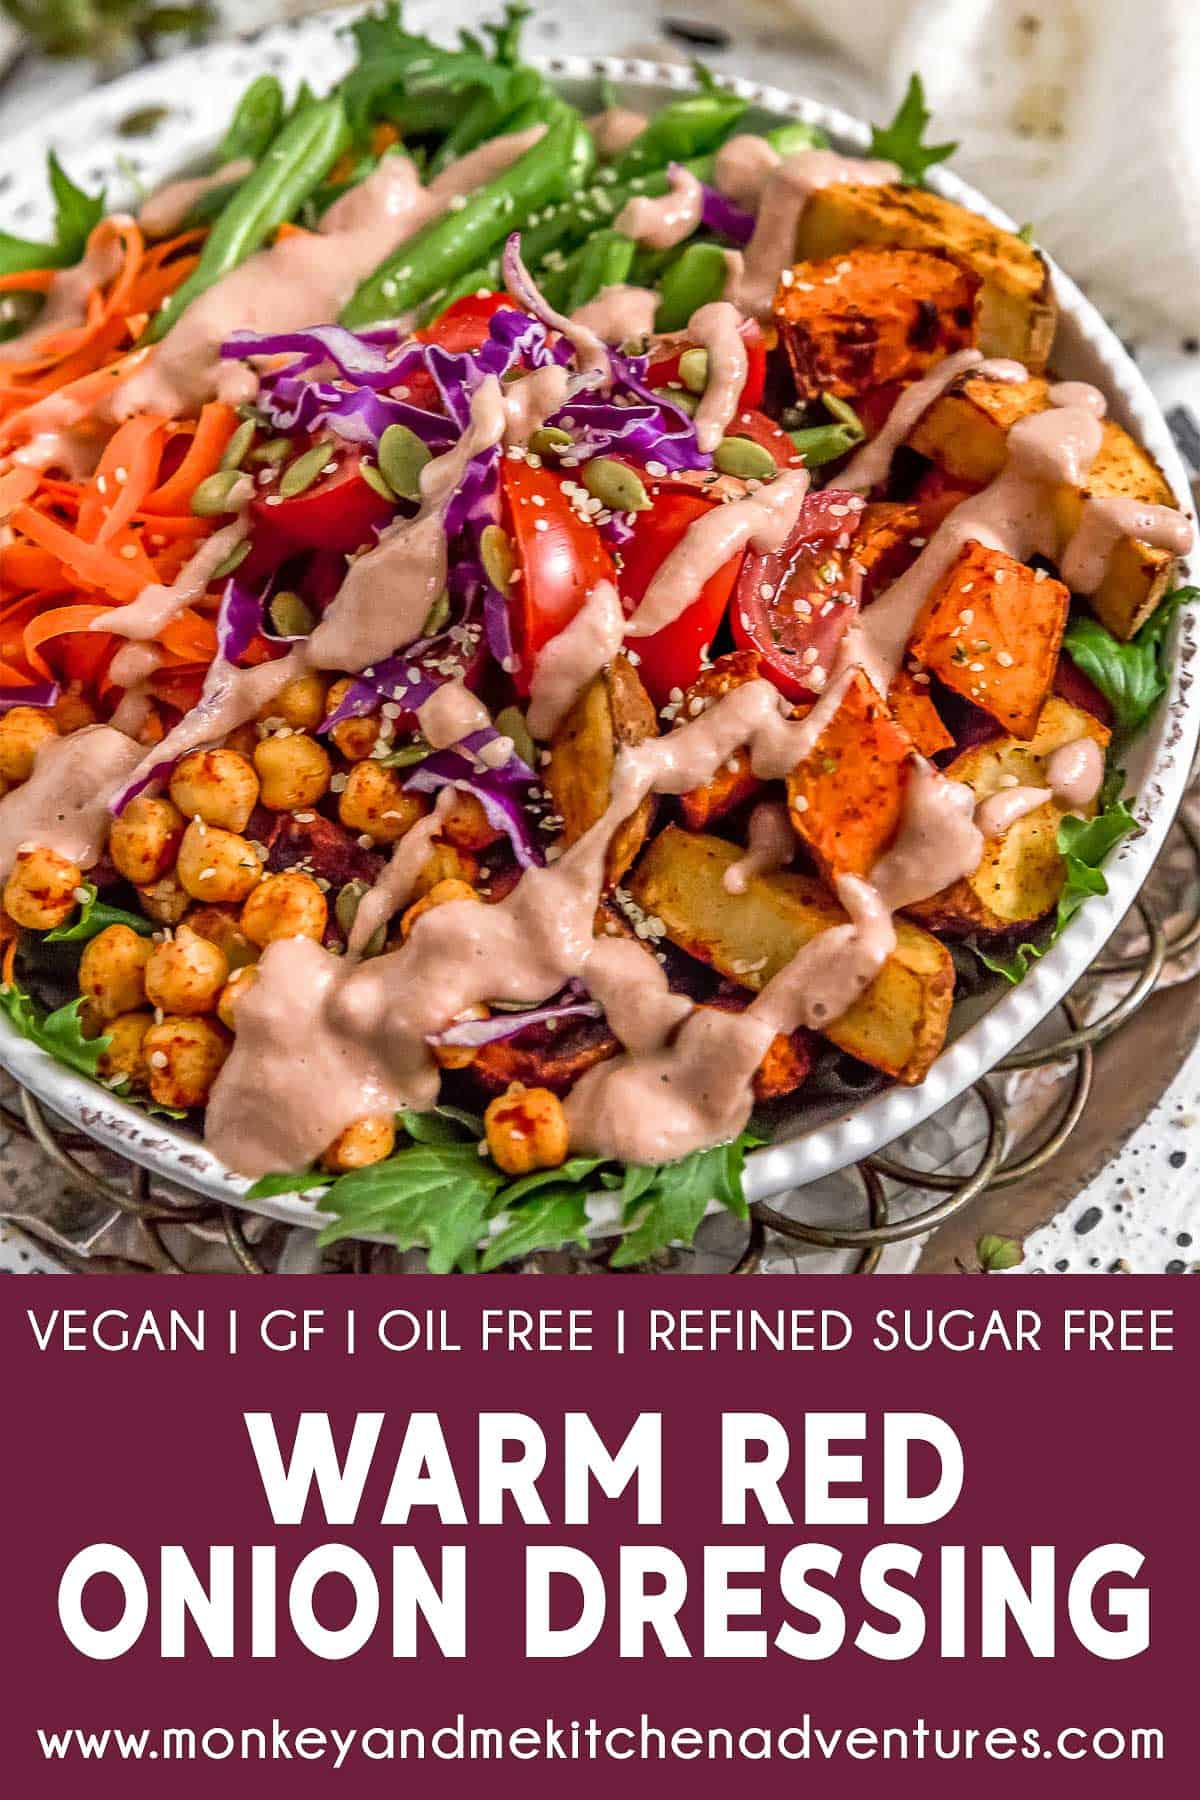 Warm Red Onion Dressing with text description